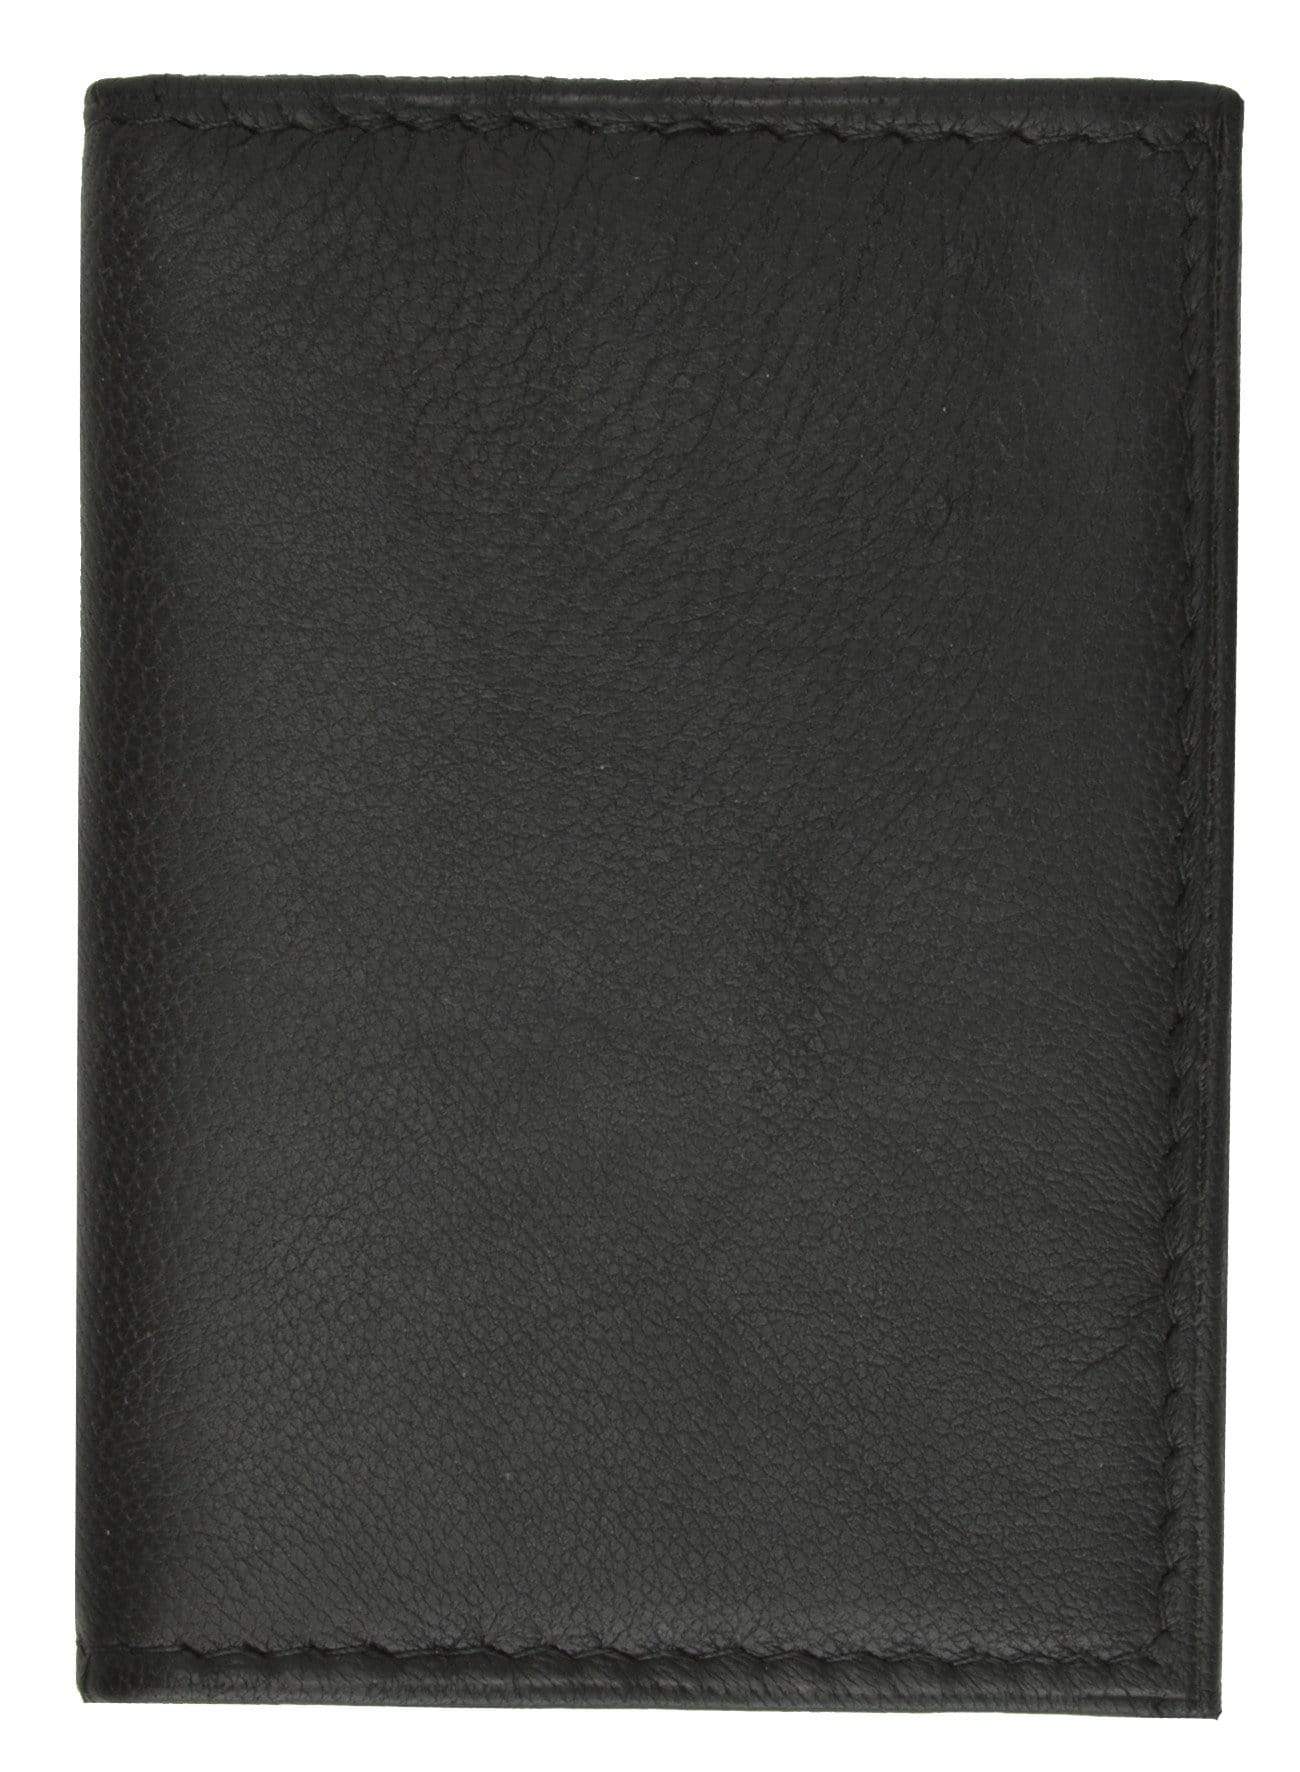 European Style Bifold Trifold Genuine Leather Wallet with ID Window 518 CF